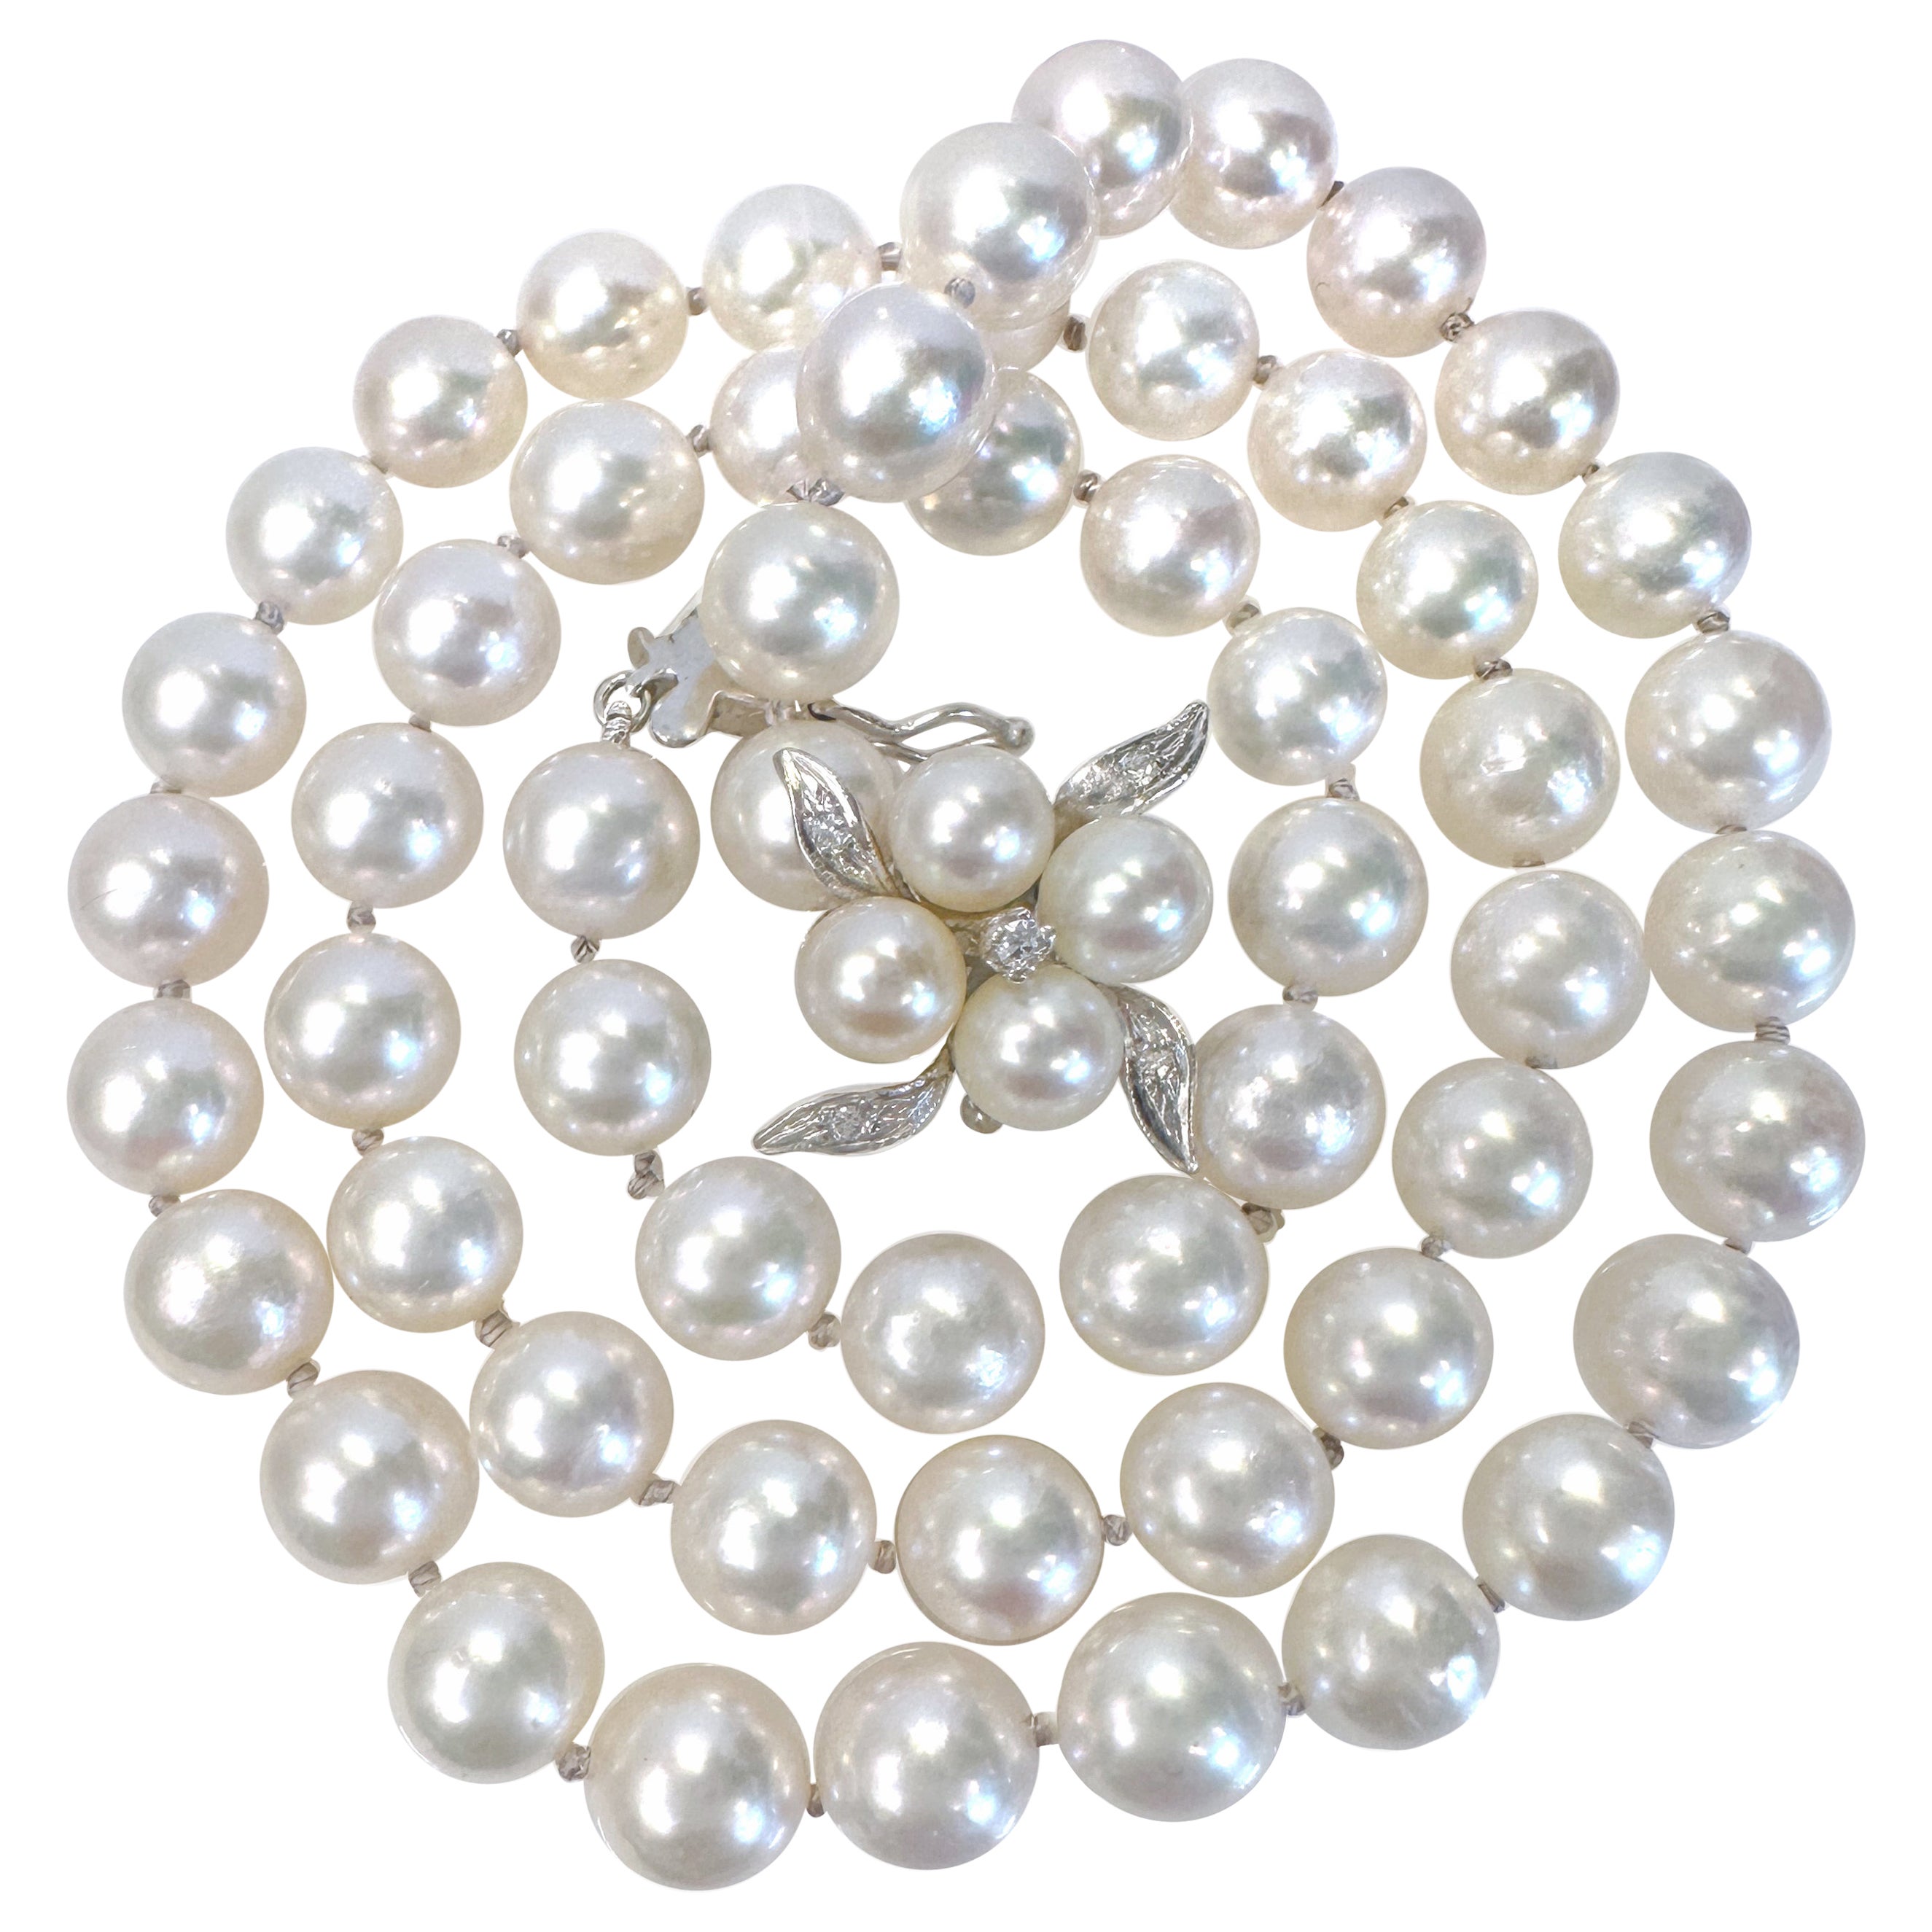 Princess Length 7mm Akoya Pearl Necklace with Vintage White Gold & Diamond Clasp